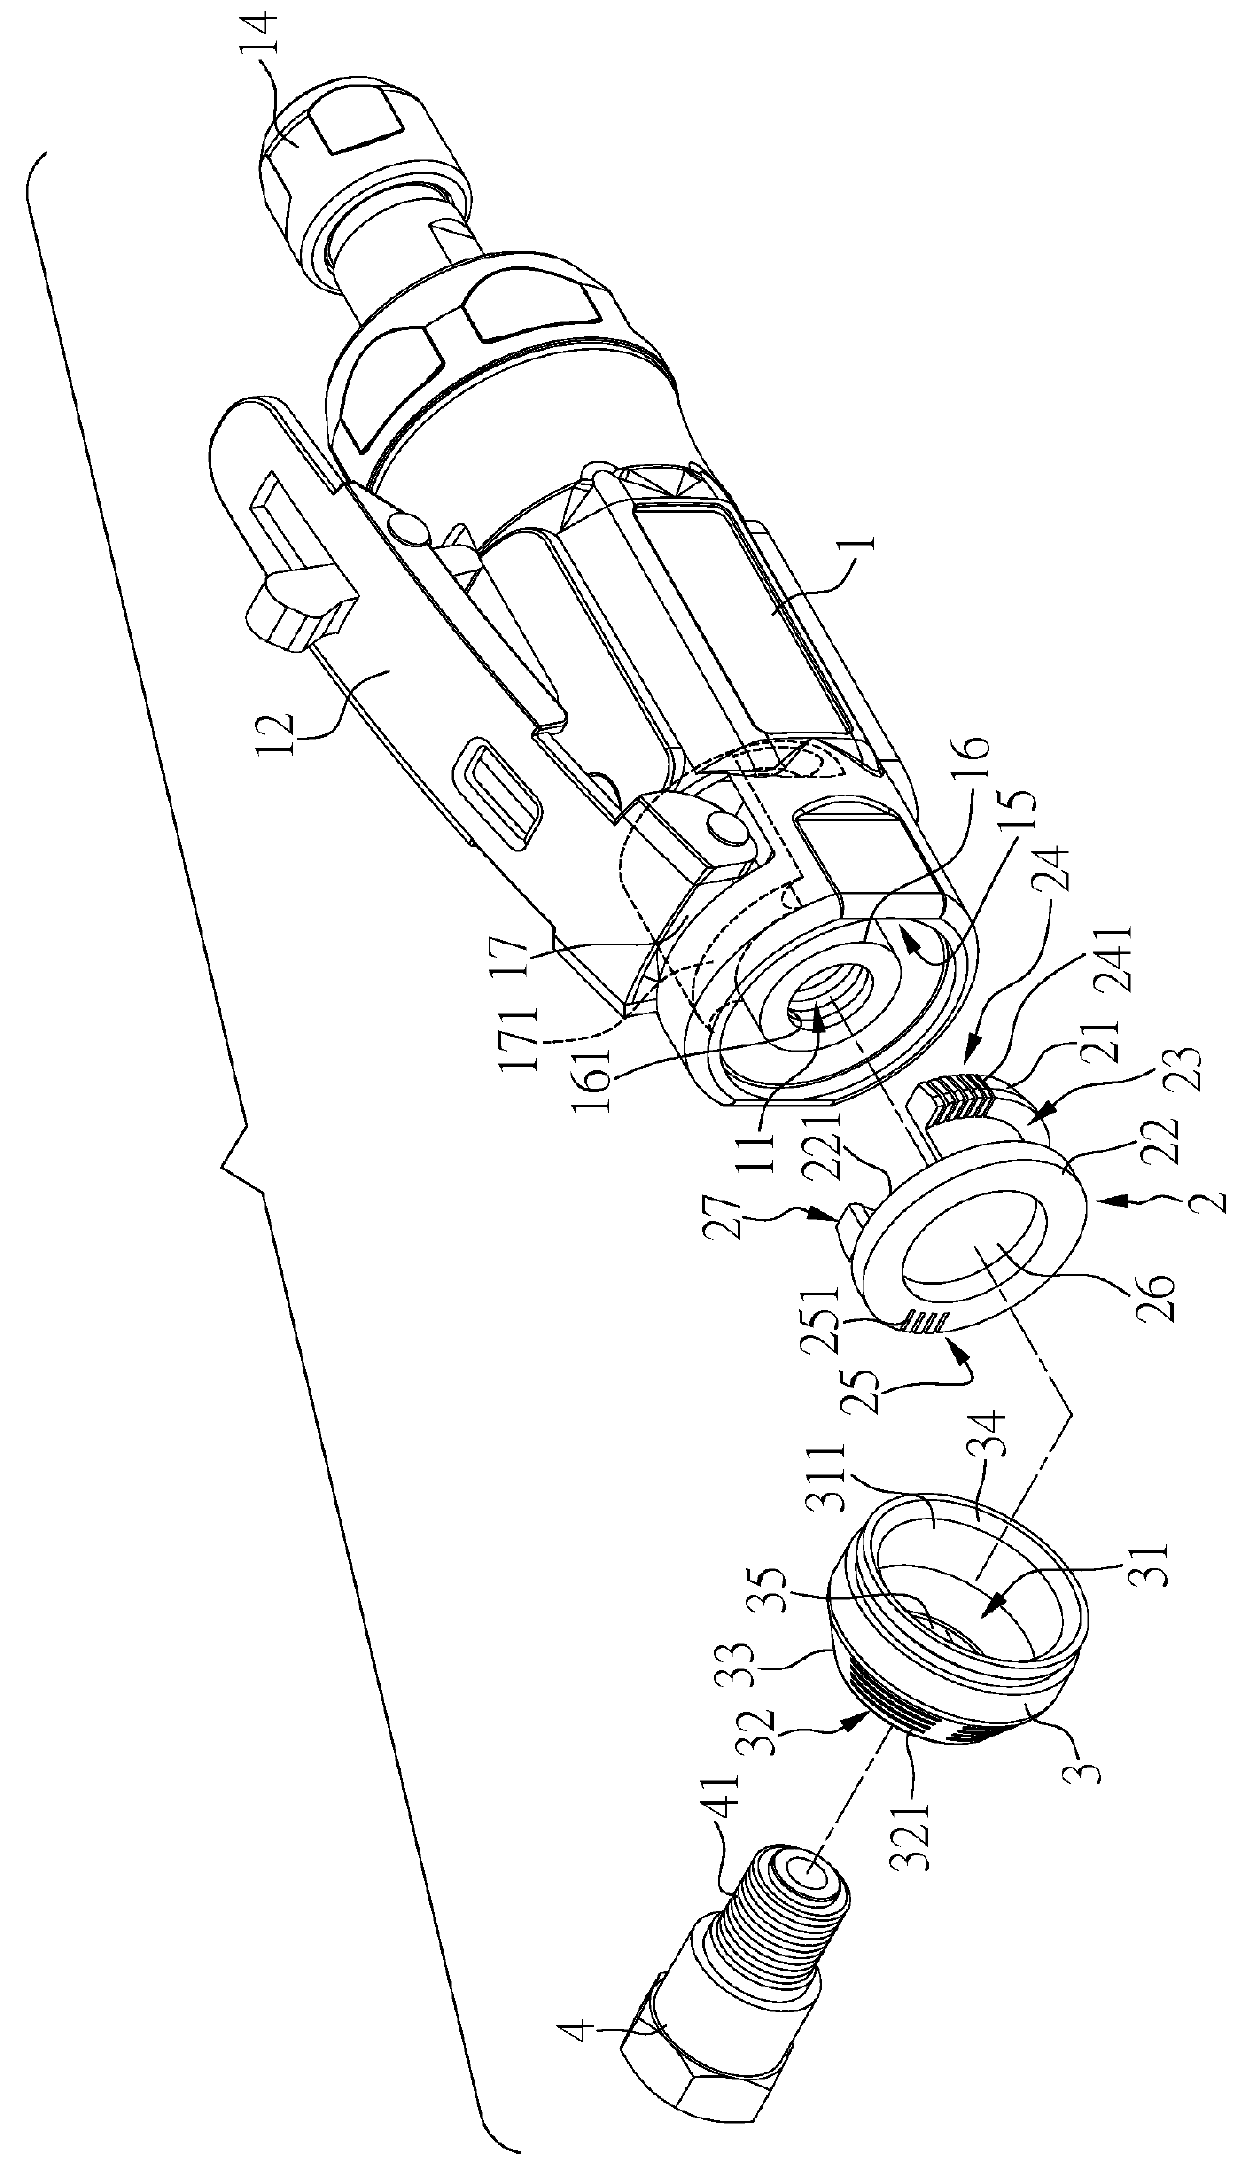 Compressed air tool having silencer structure